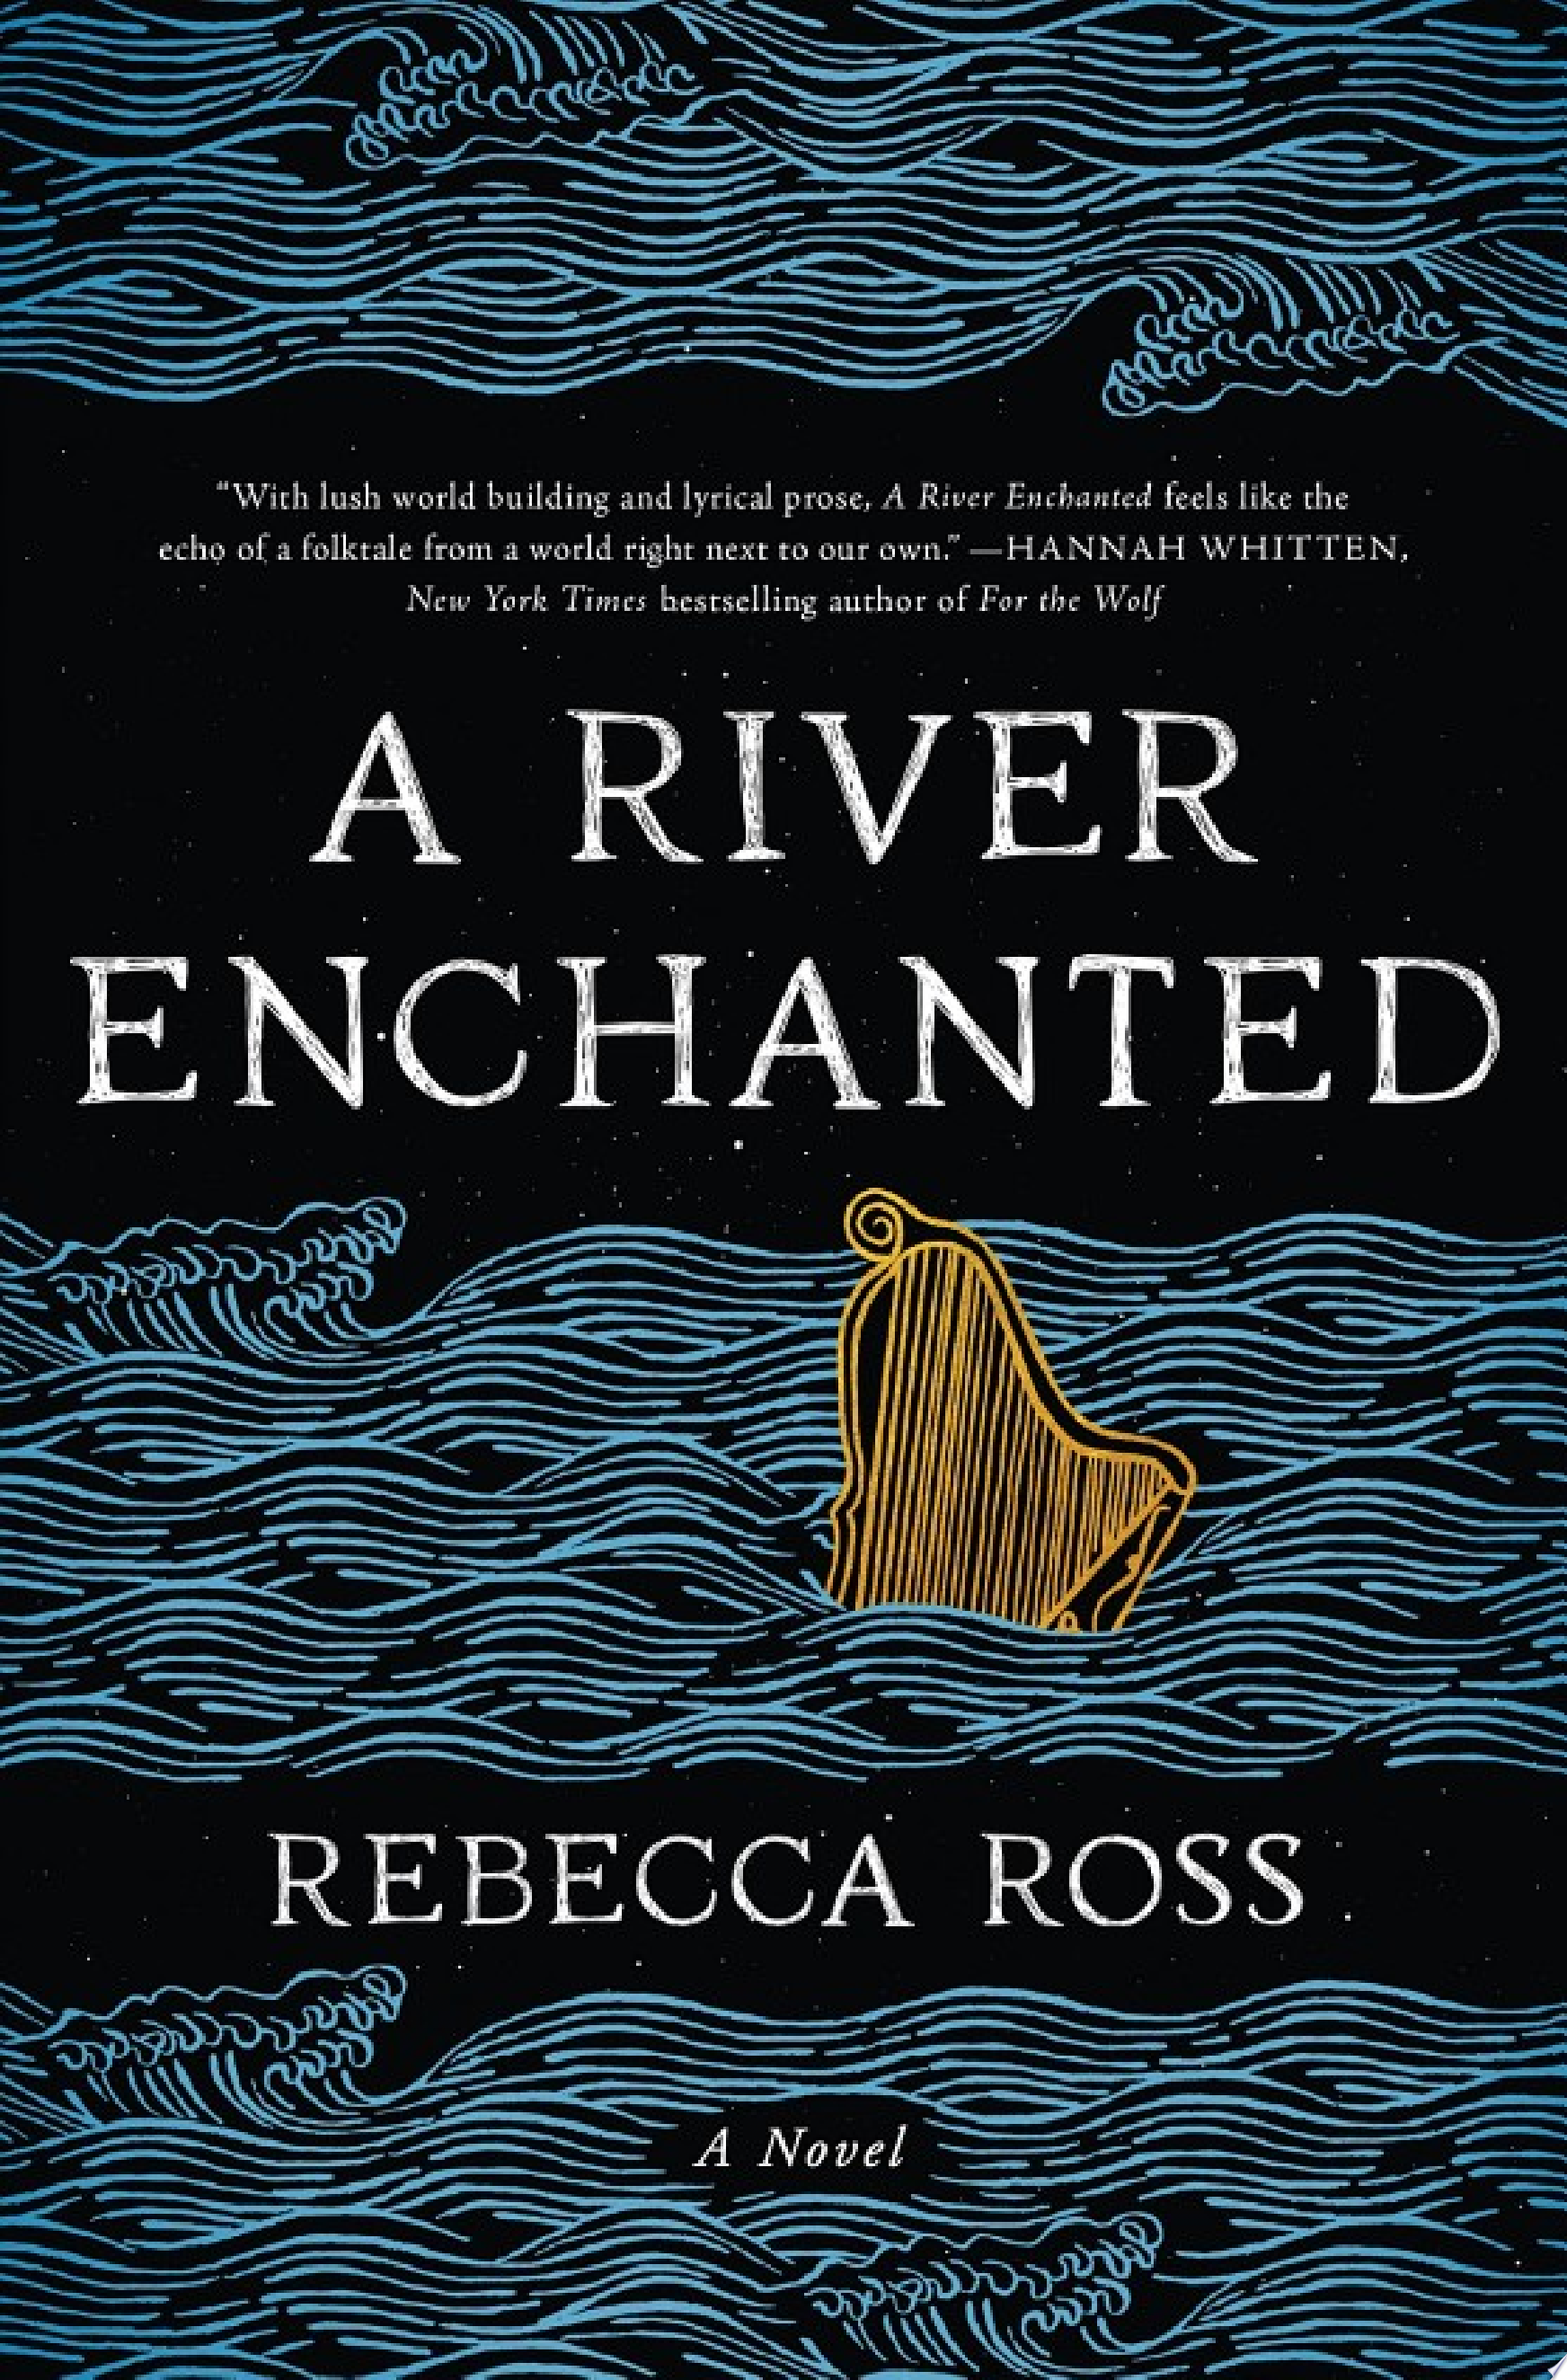 Image for "A River Enchanted"